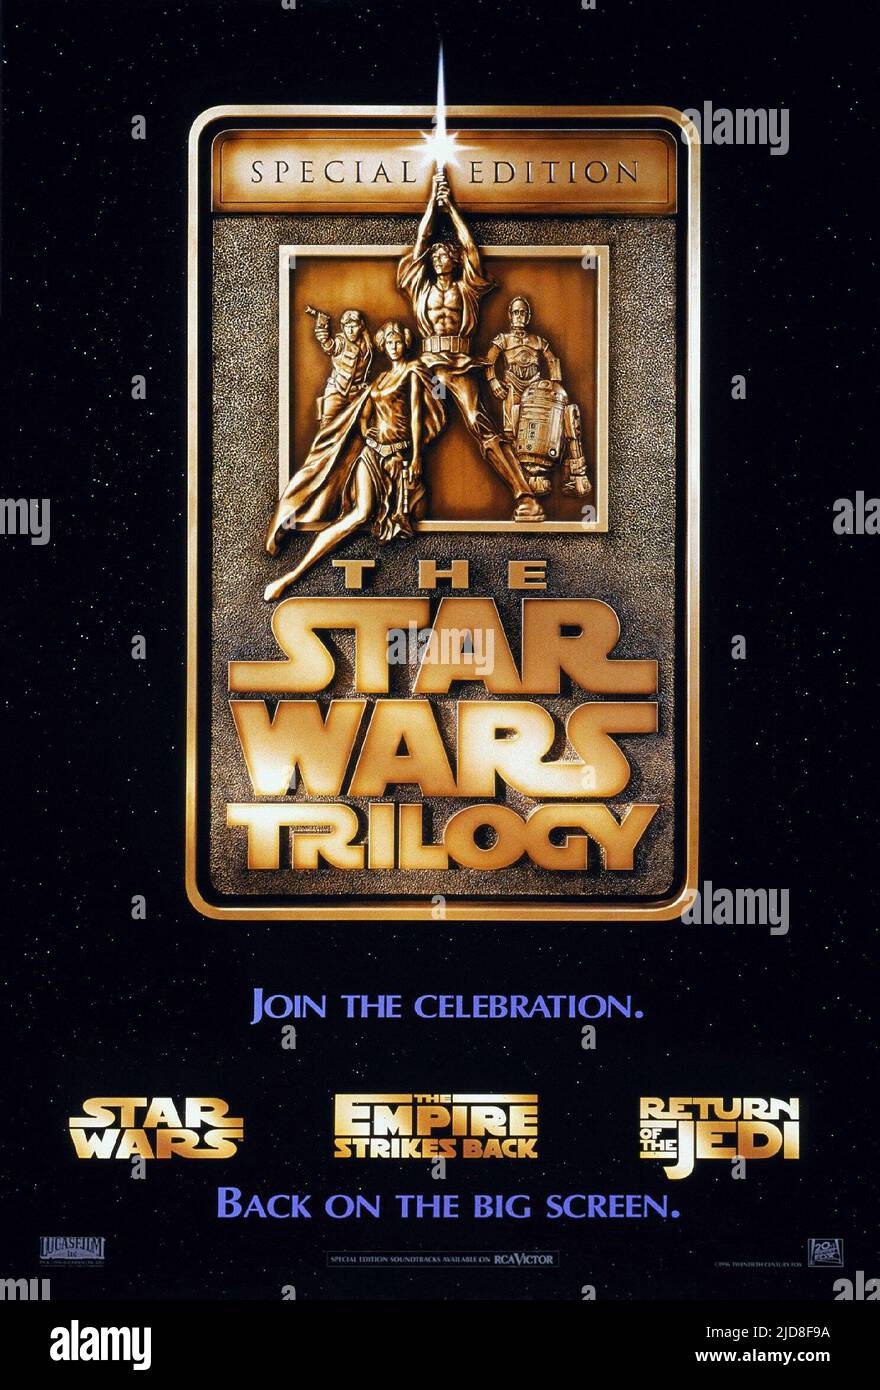 MOVIE POSTER, STAR WARS TRILOGY, 2005, Stock Photo